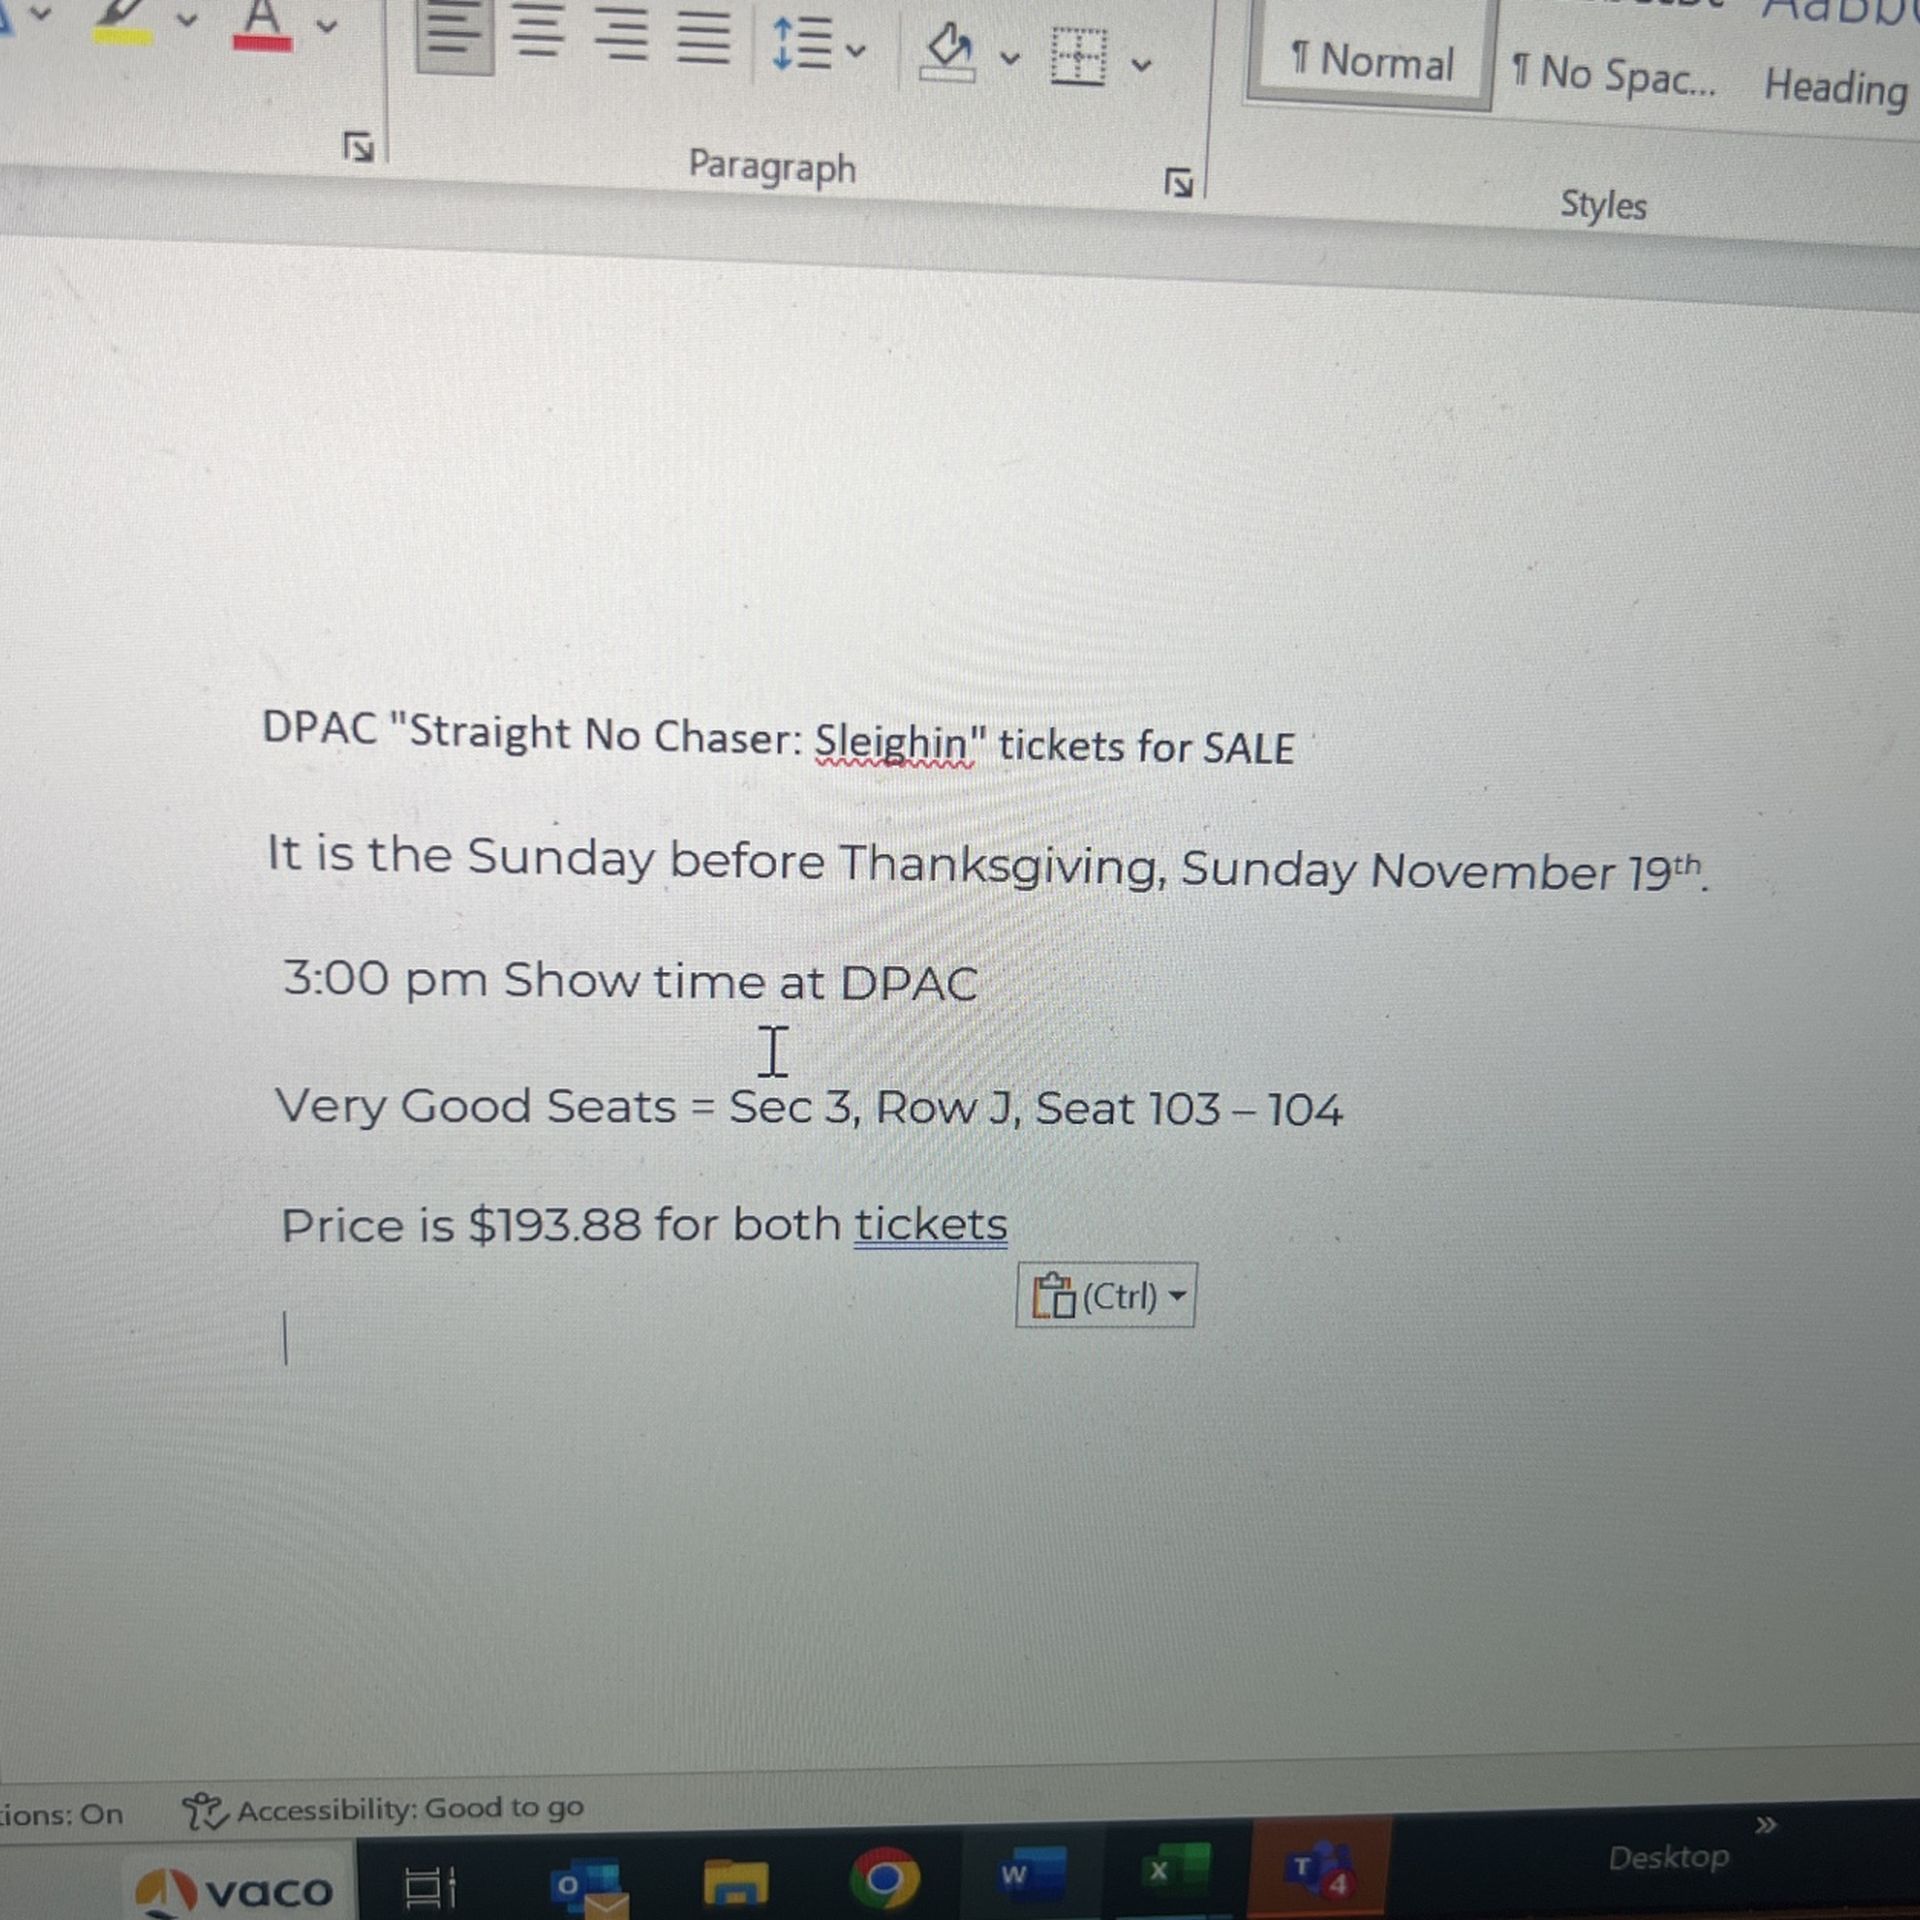 DPAC "Straight No Chaser: Sleighin" tickets for SALE  On Sunday November 19th.